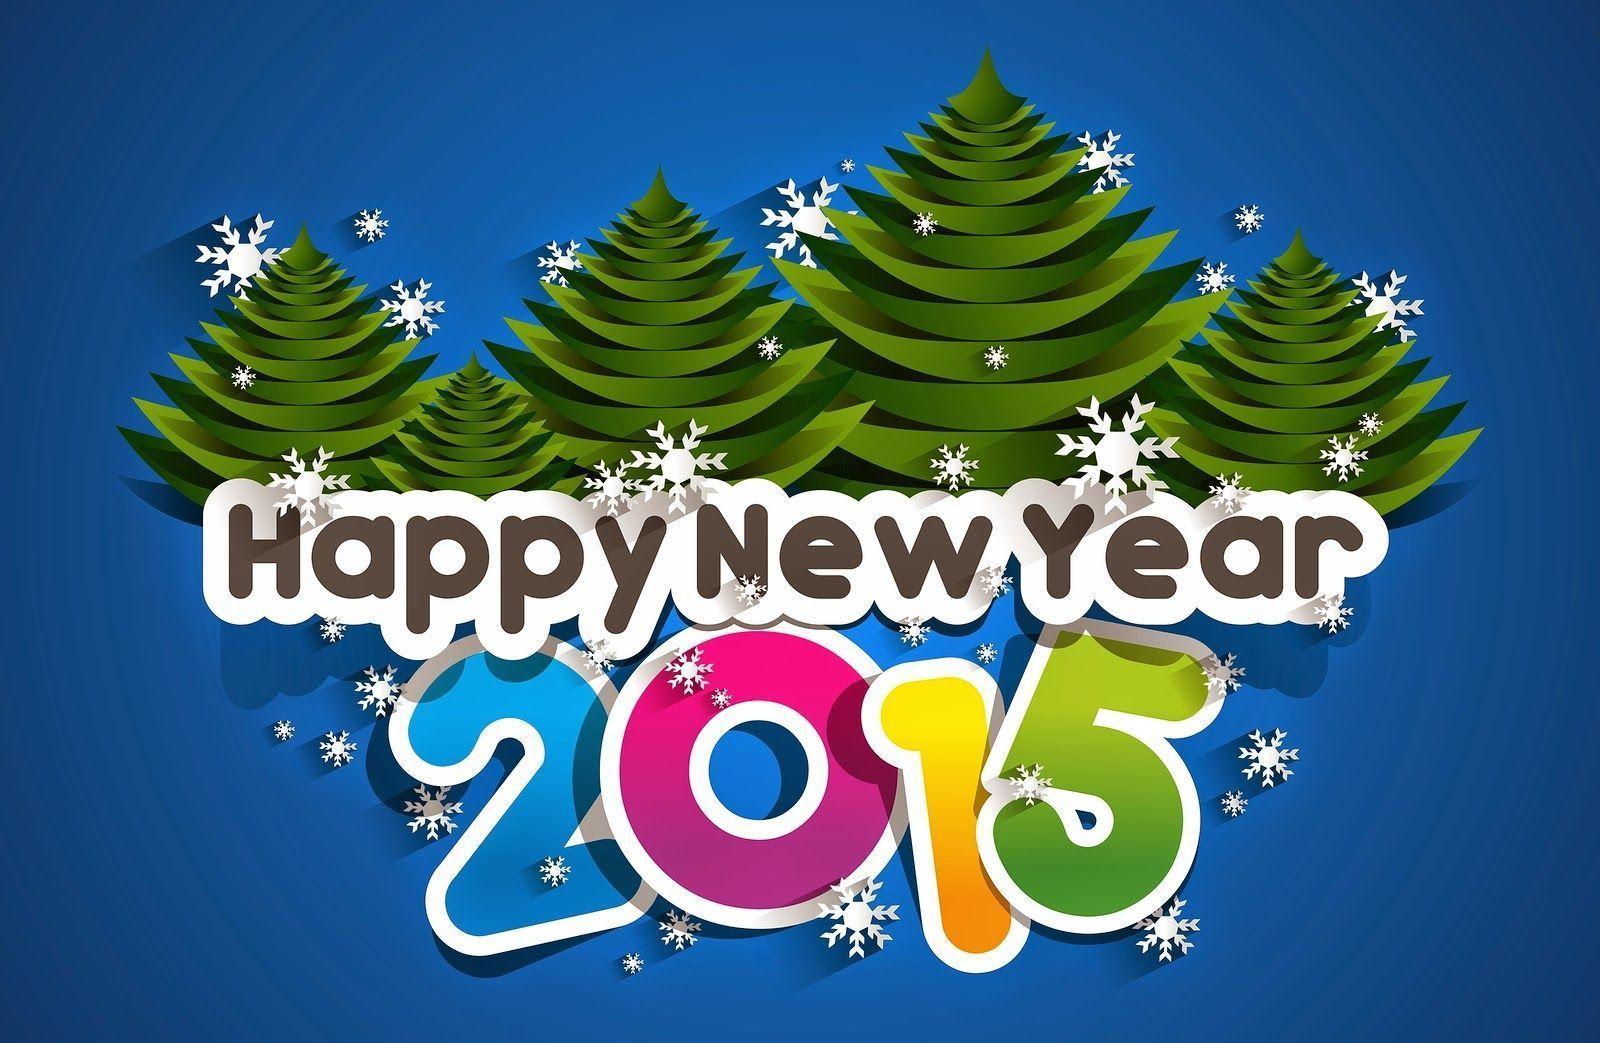 Happy New Year 2015 wallpaper and photo. HD Wallpaper 2015